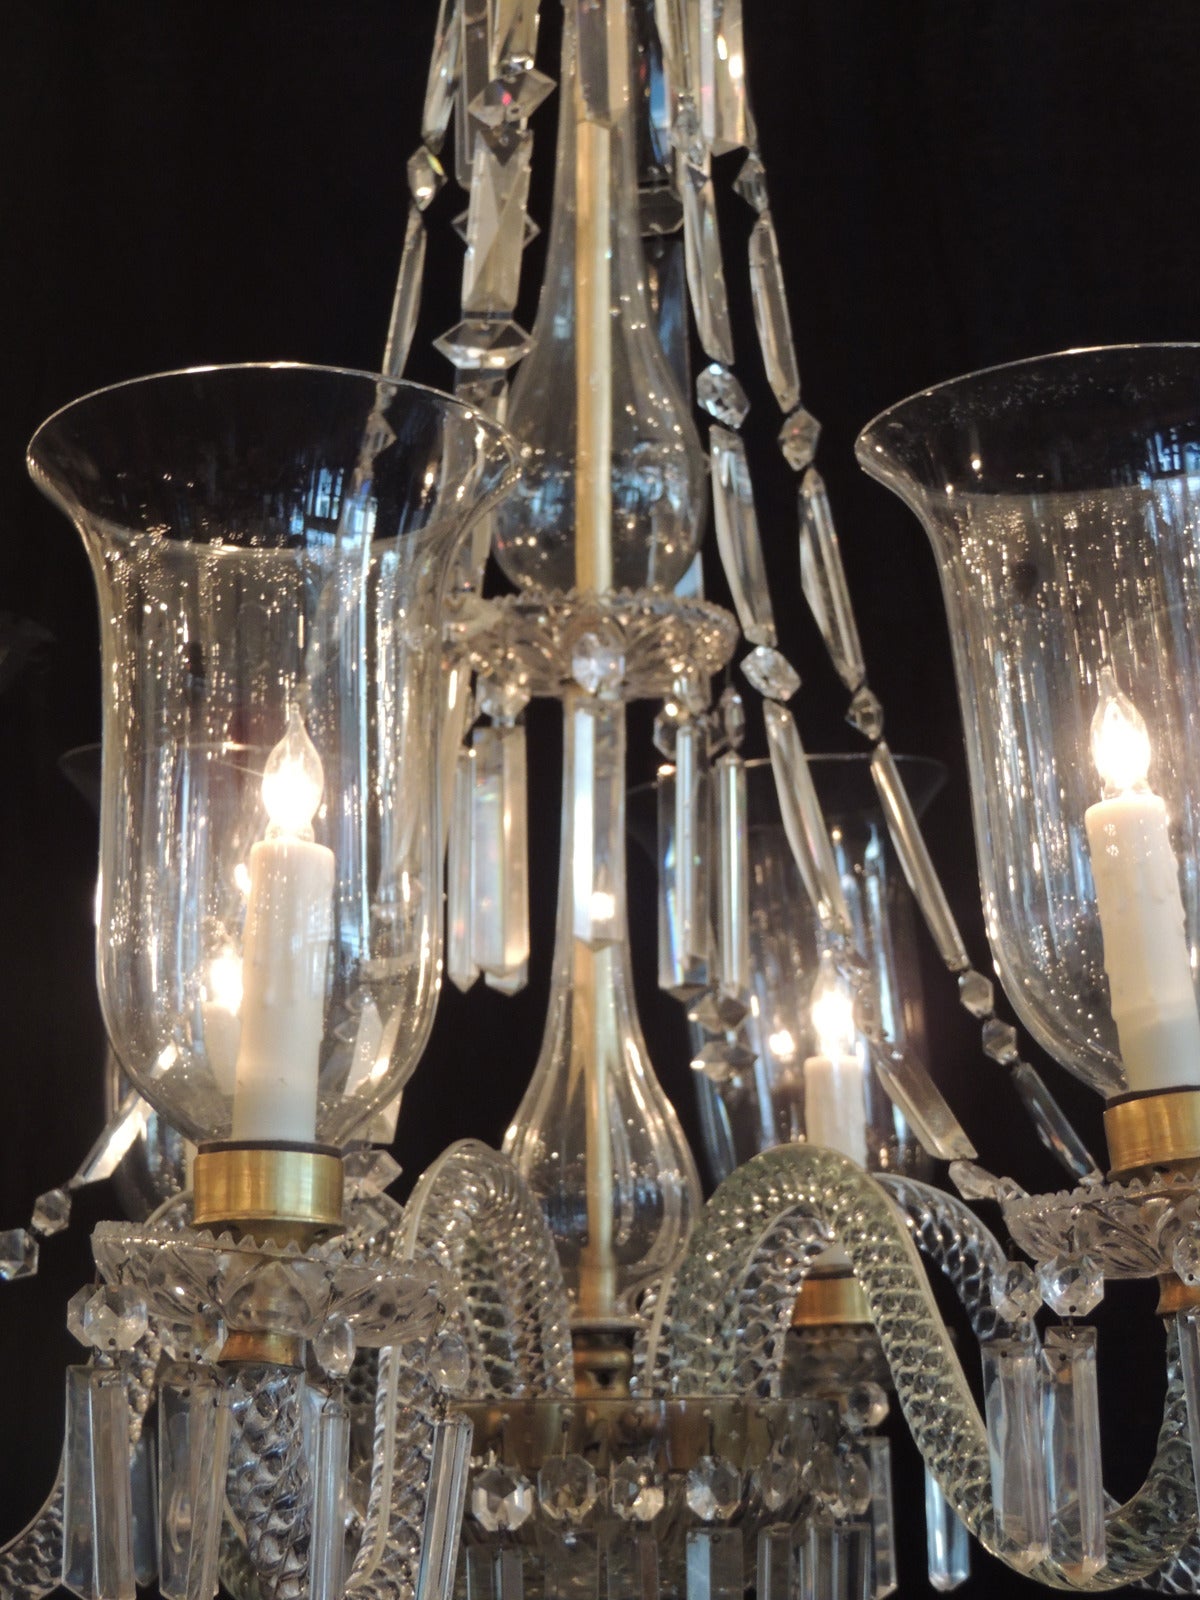 This grand Georgian crystal chandelier was made in the Ireland, circa 1770. This fixture features six lights with cut crystal bobeches, original hurricane shades and cut crystal arms. The middle structure of the piece is covered with a crystal